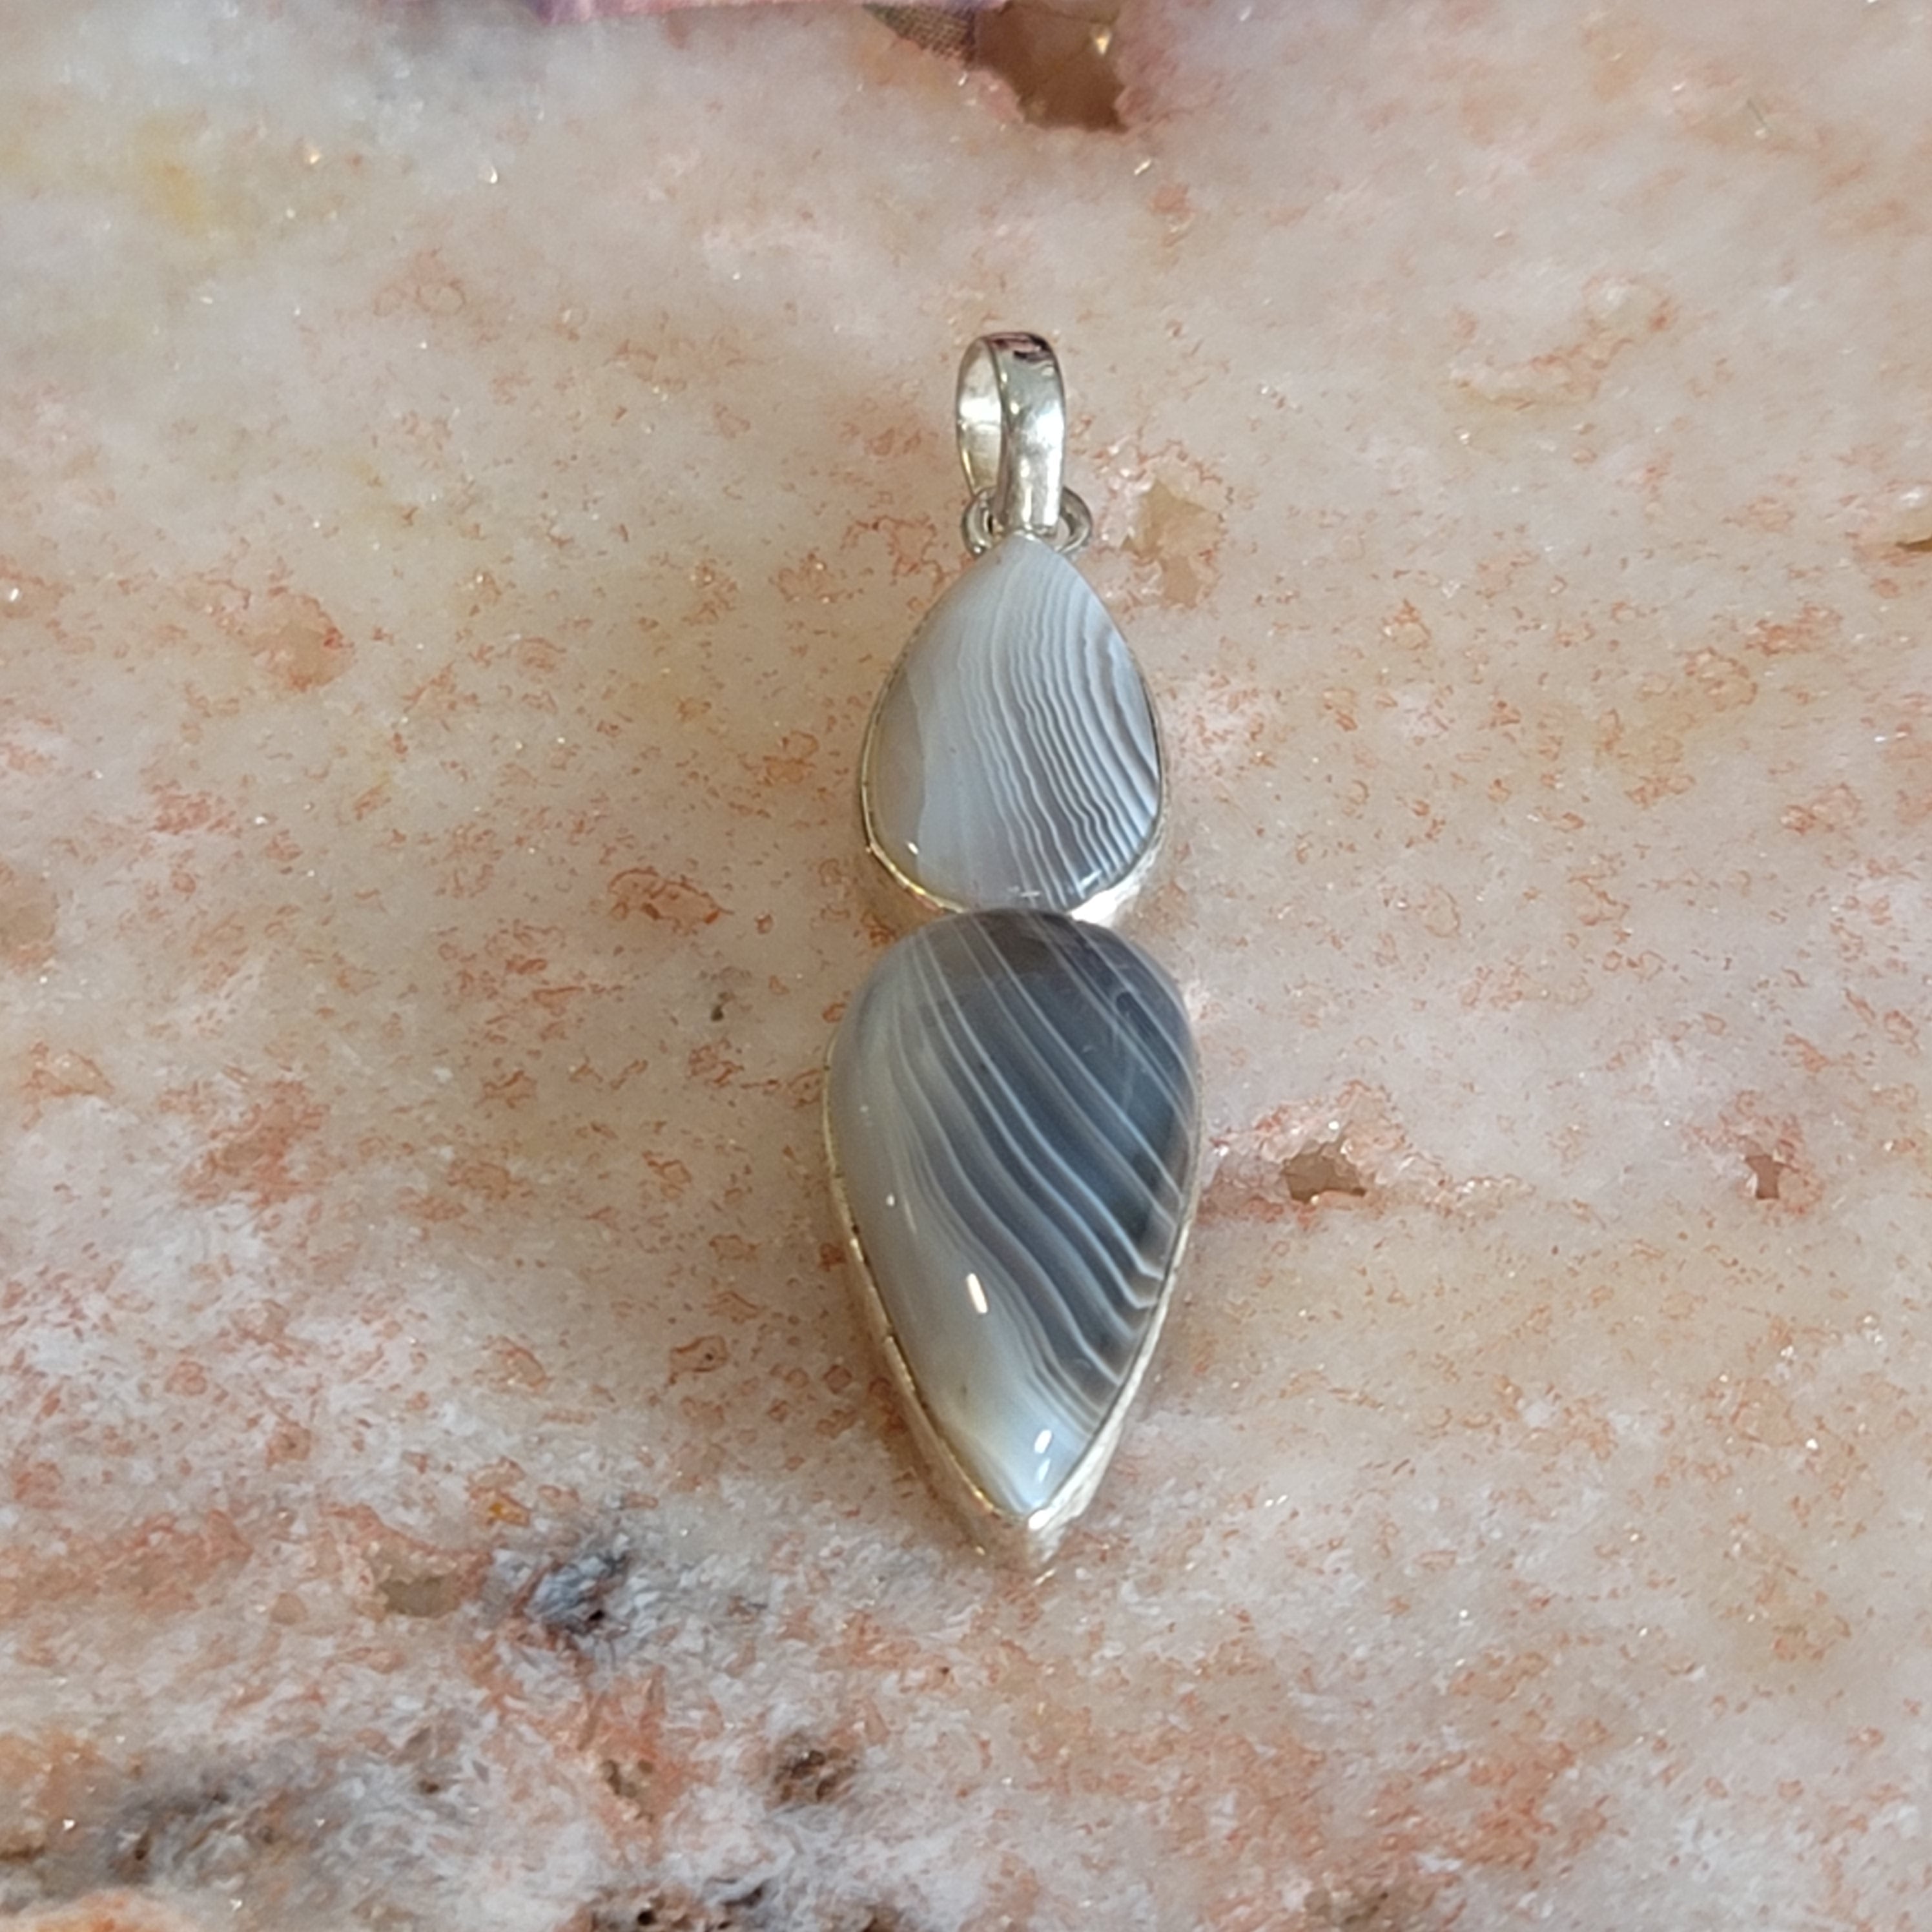 Botswana Agate Pendant .925 Silver for Hope, Protection and Strength